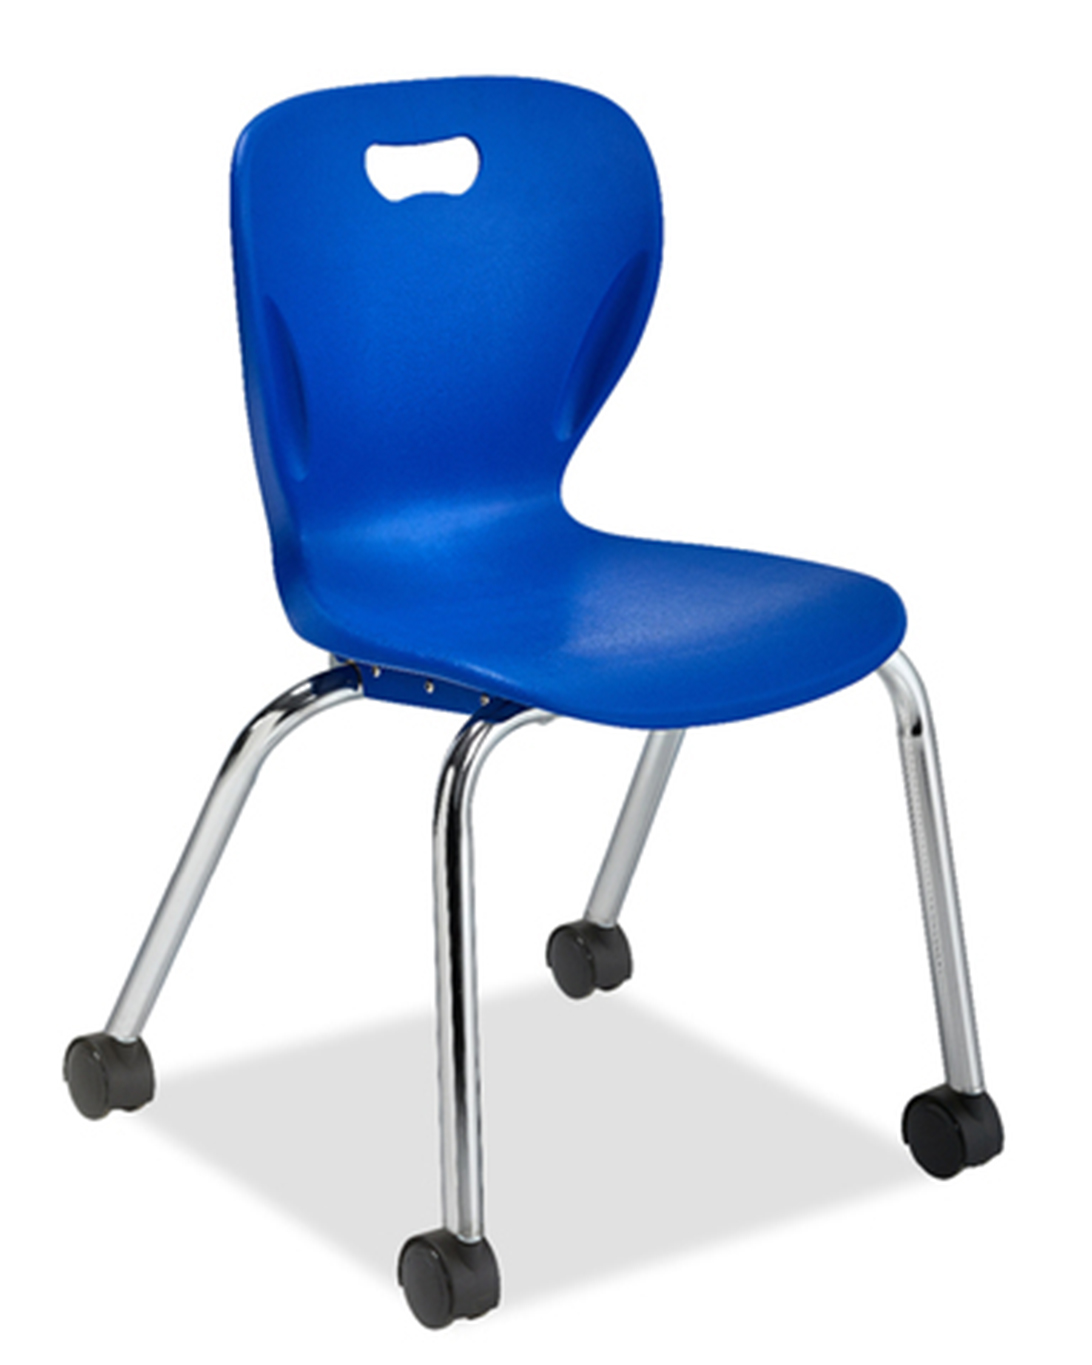 Caster Chairs